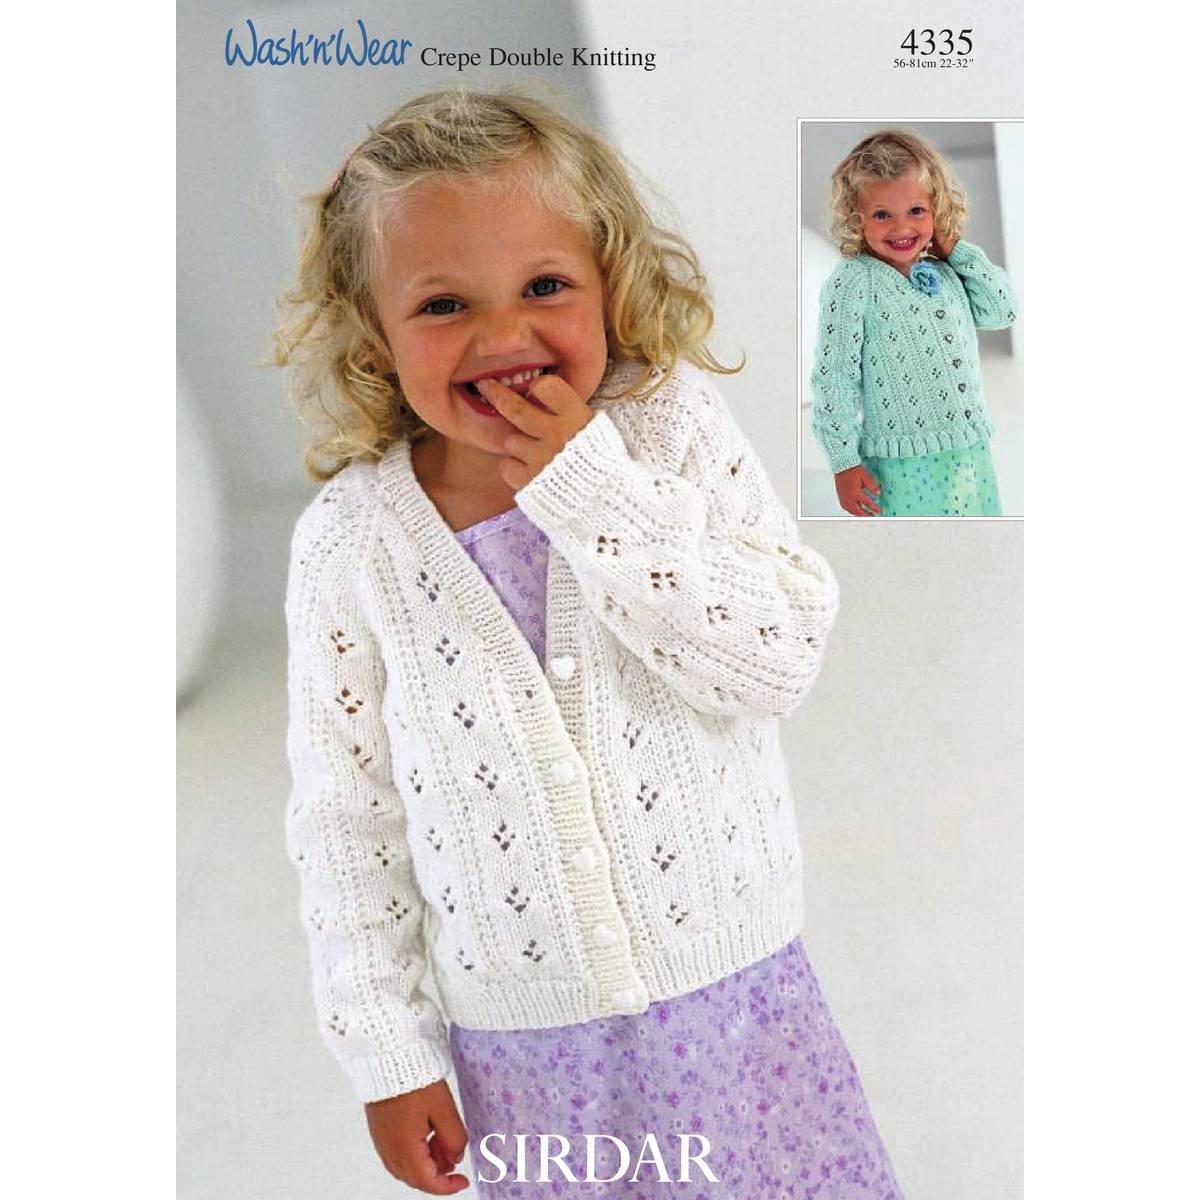 Knitting Patterns For Teenage Sweaters Knitting Patterns Expert Easy Knitting Patterns Hobcraft